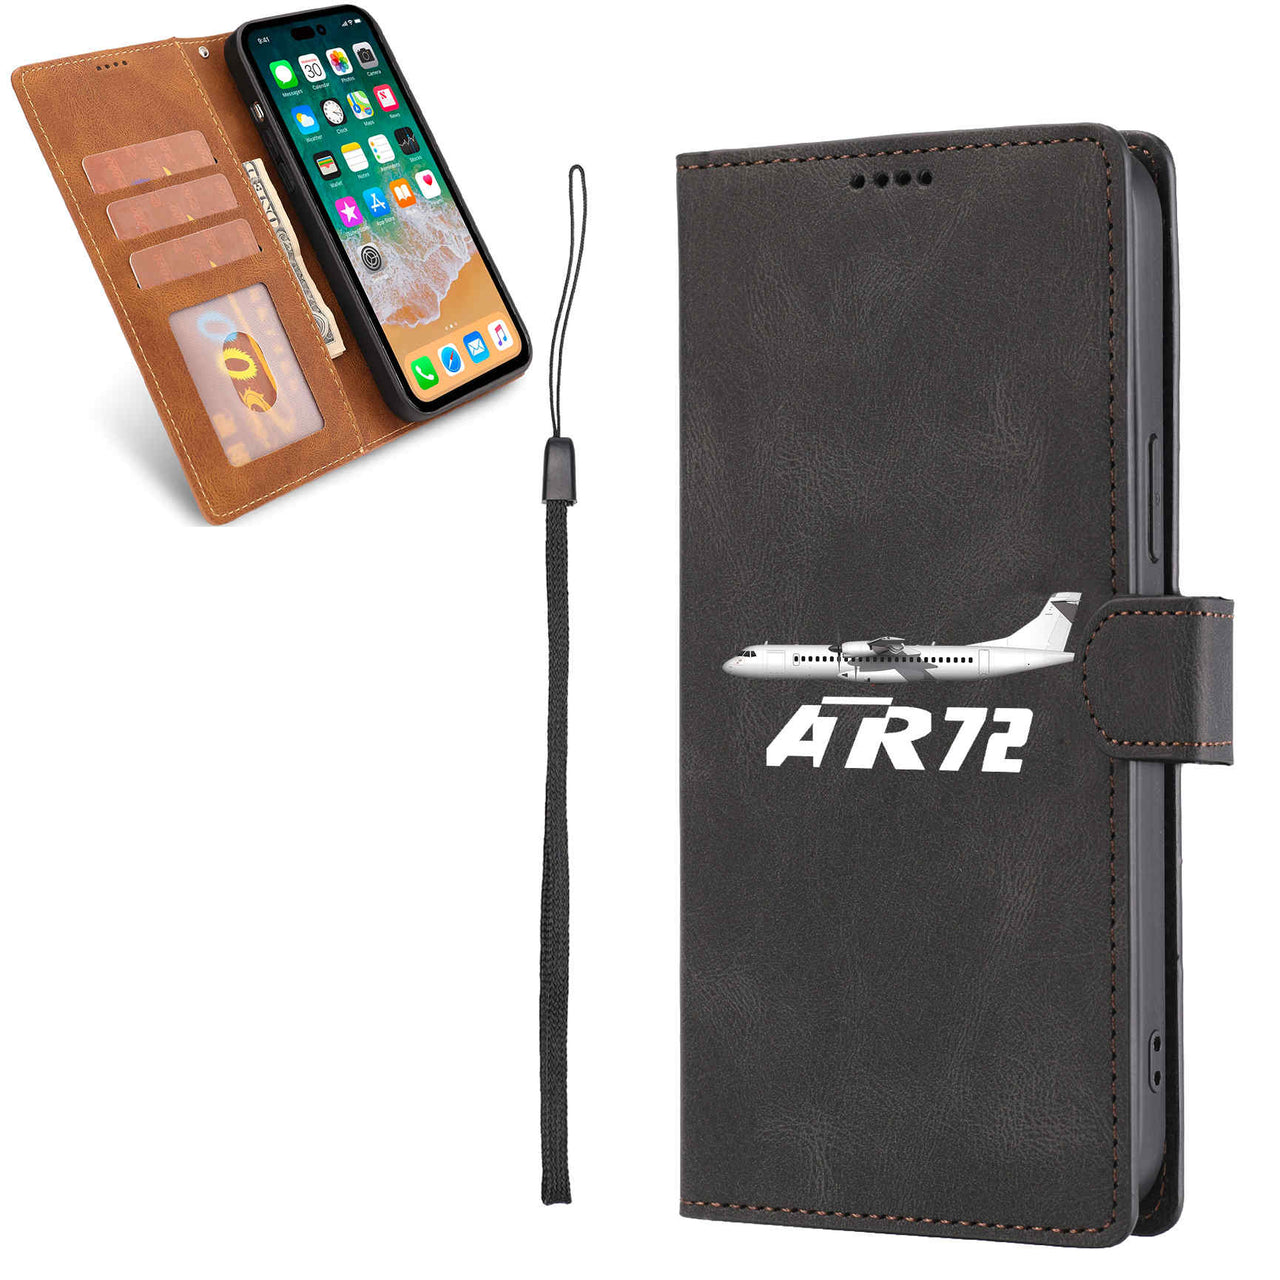 The ATR72 Leather Samsung A Cases